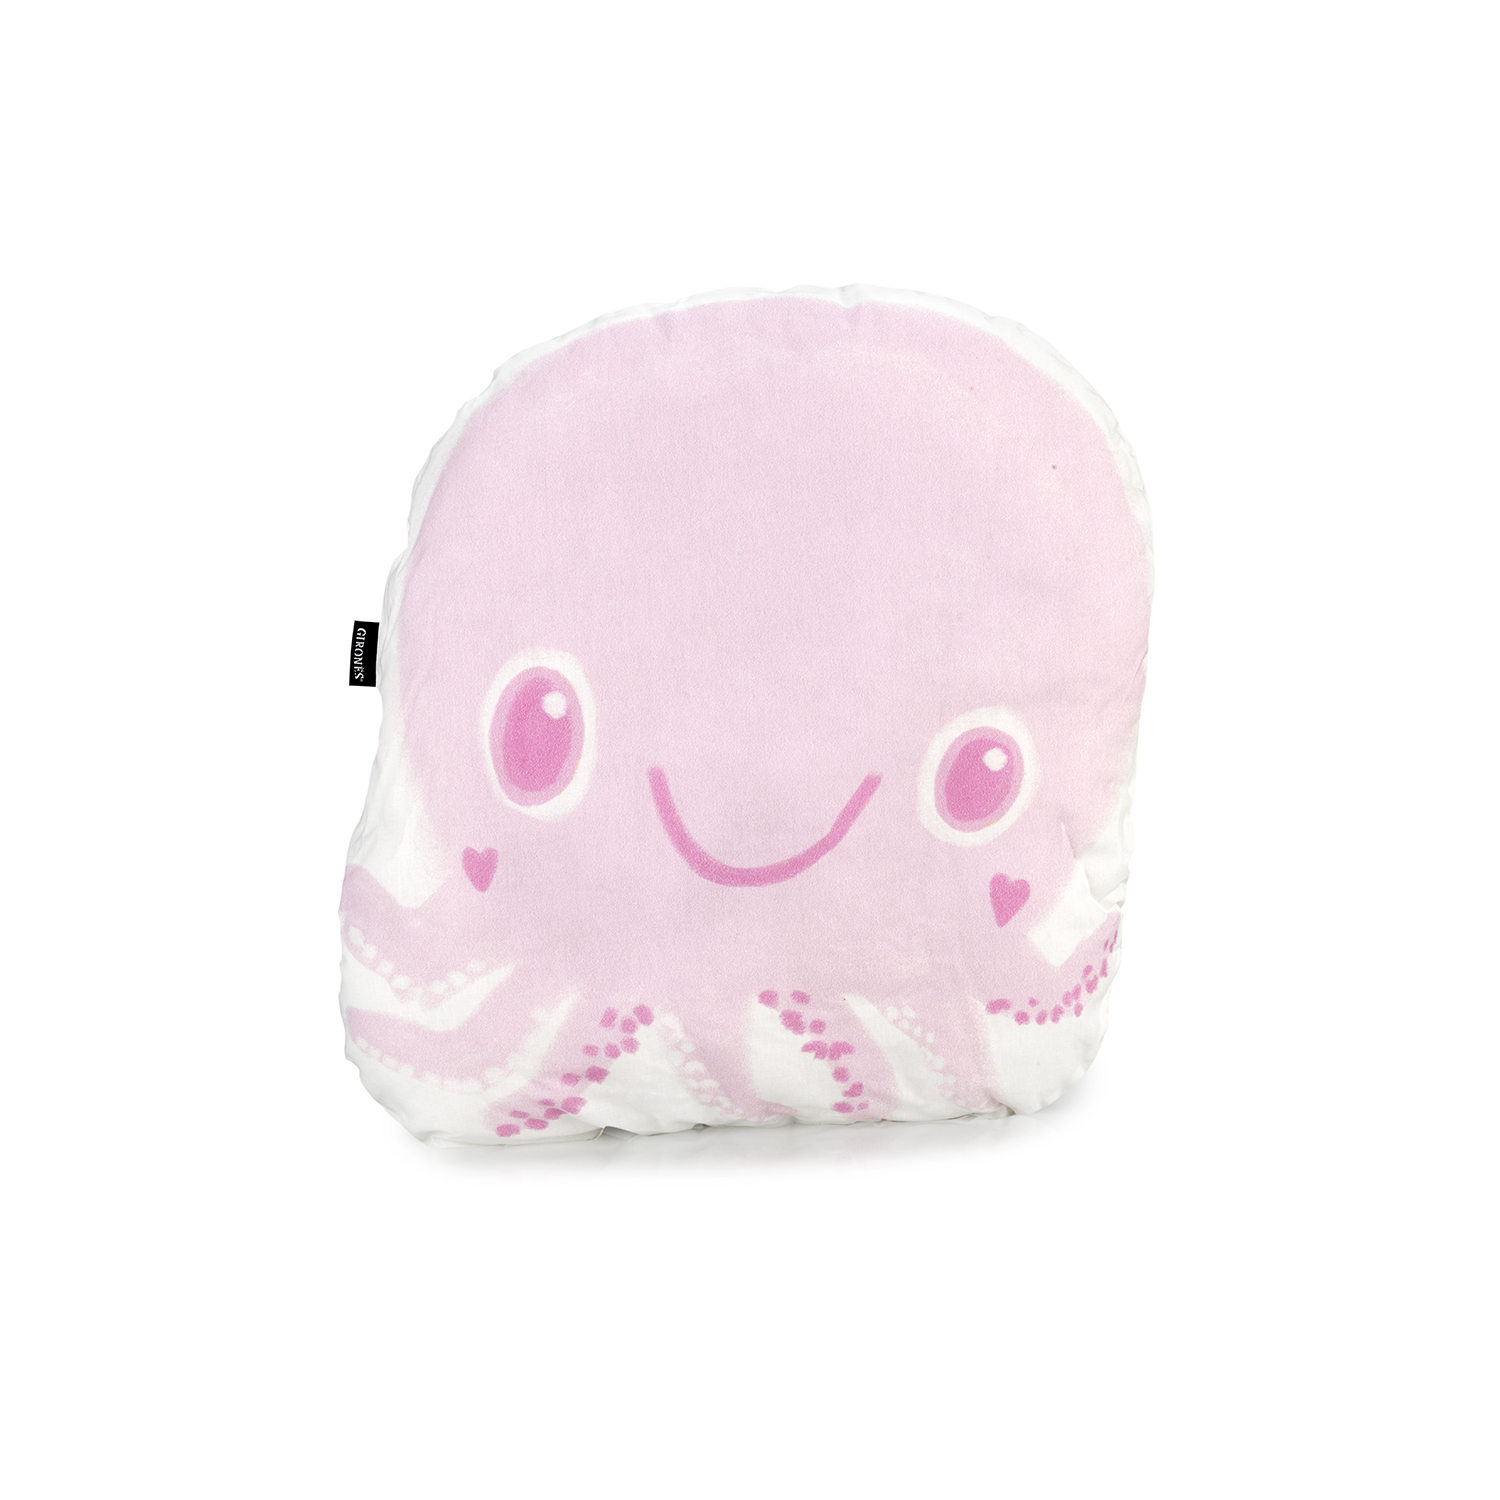 Octopus shaped cushion by GironesHome